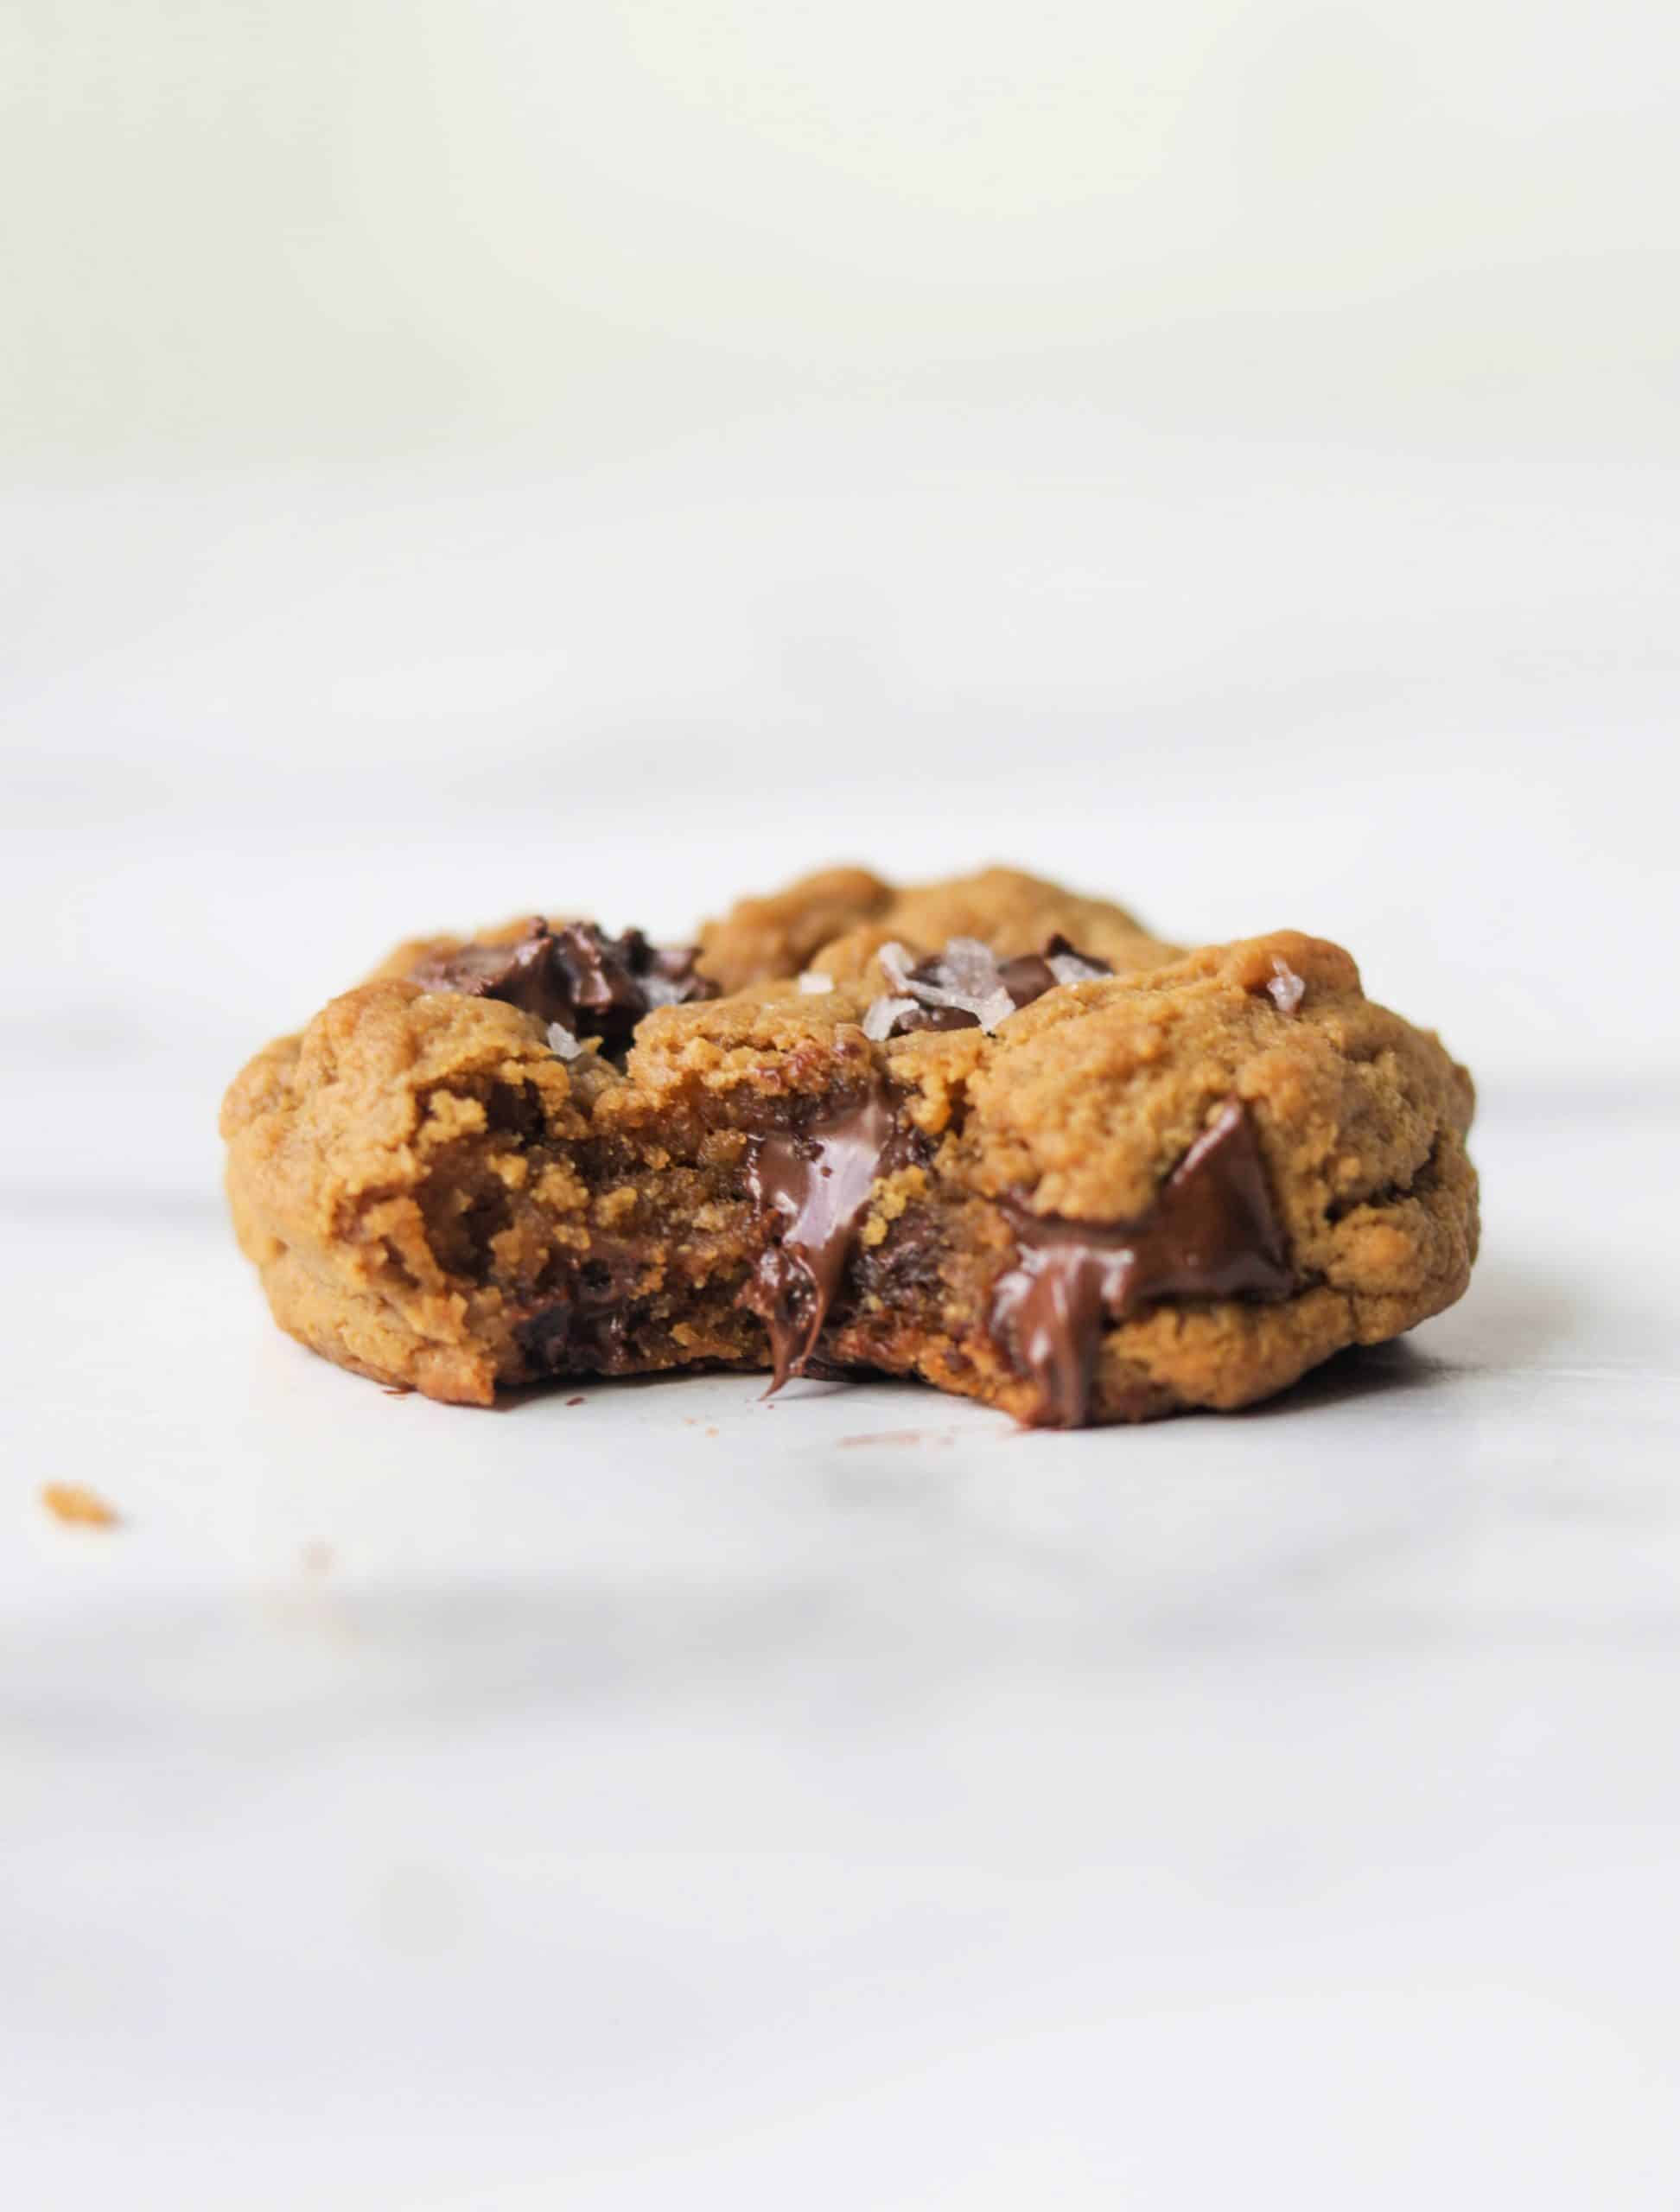 A single peanut butter cookie with dark chocolate on a white marble backdrop.